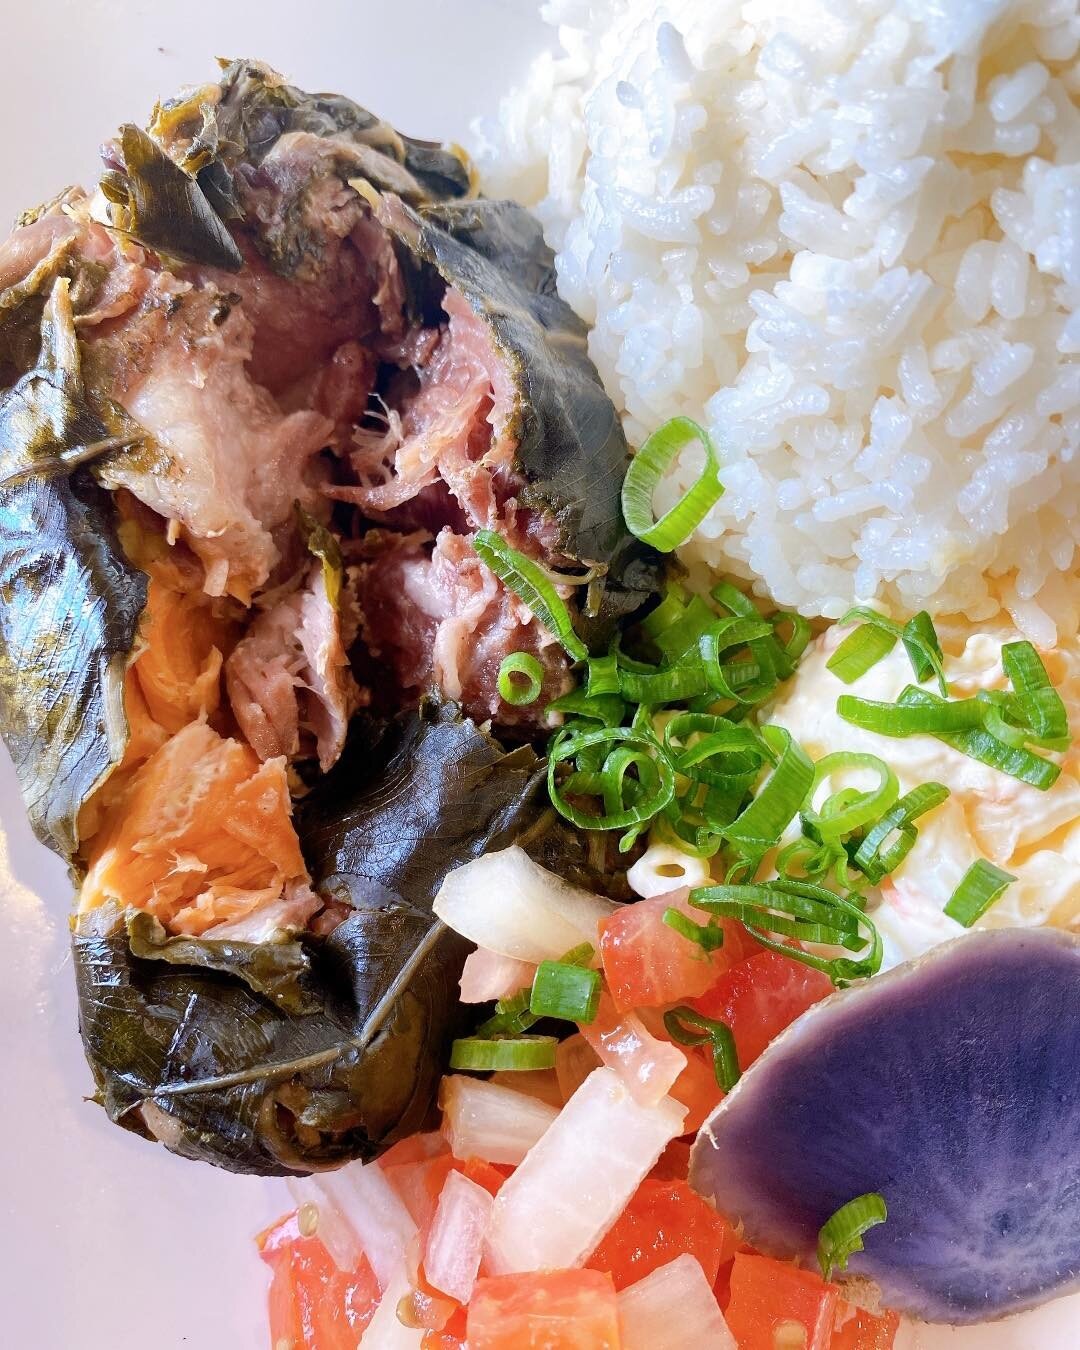 Special for Thursday, May 26:

Deluxe Lau Lau $18 - Housemade laulau filled with salmon belly, koji cured pork butt, beef, served with mac salad, steamed okinawan sweet potato, lomi tomato, choice base

FISH SANDO $14 - panko battered fresh local mah